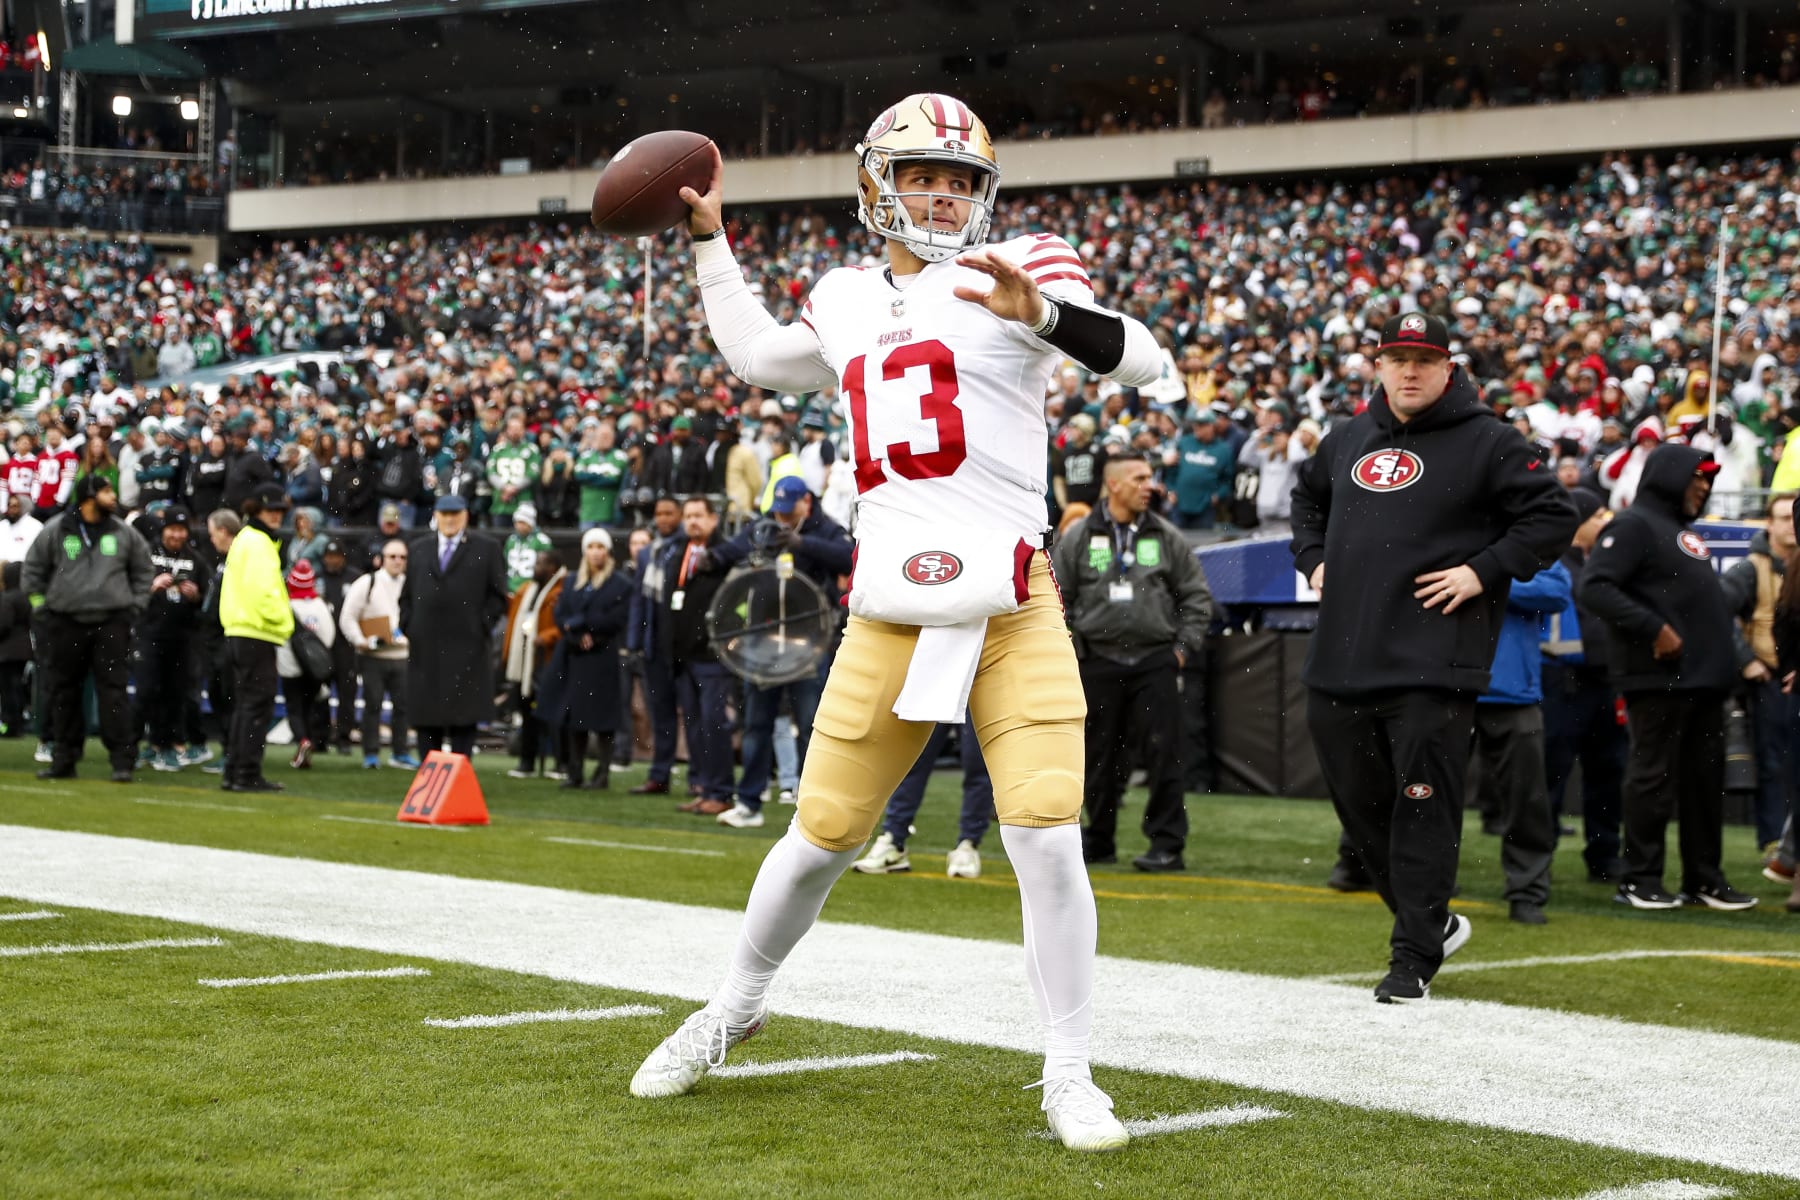 State of the 2022 San Francisco 49ers: Uncertainty looms large at key spots